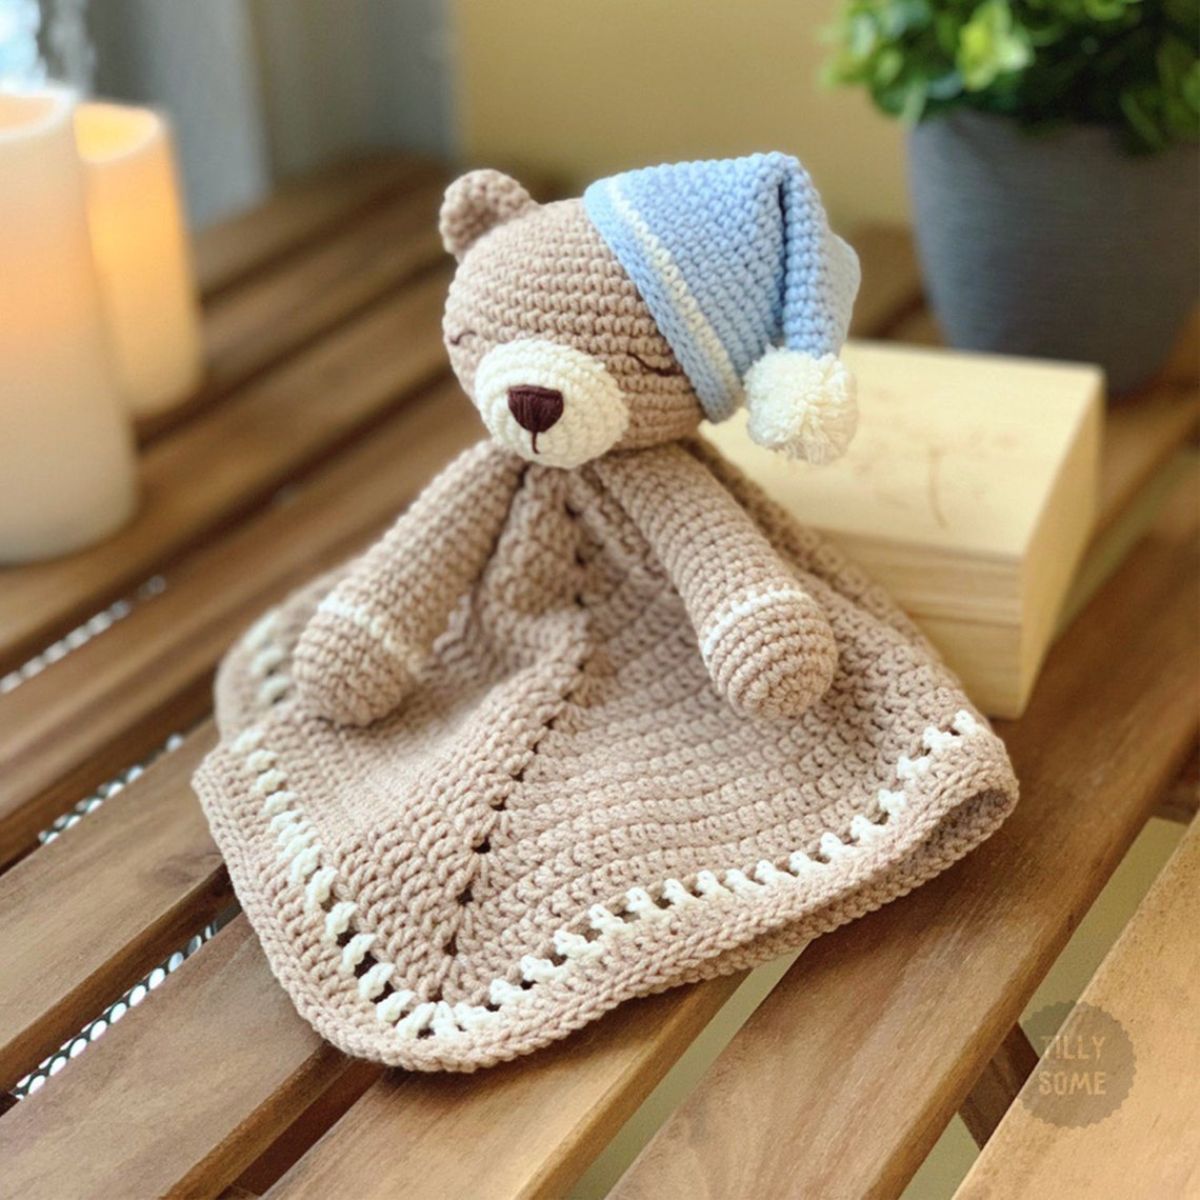 Small brown crochet blanket with a teddy bear's face and arms attached, wearing a blue night cap over its right ear.